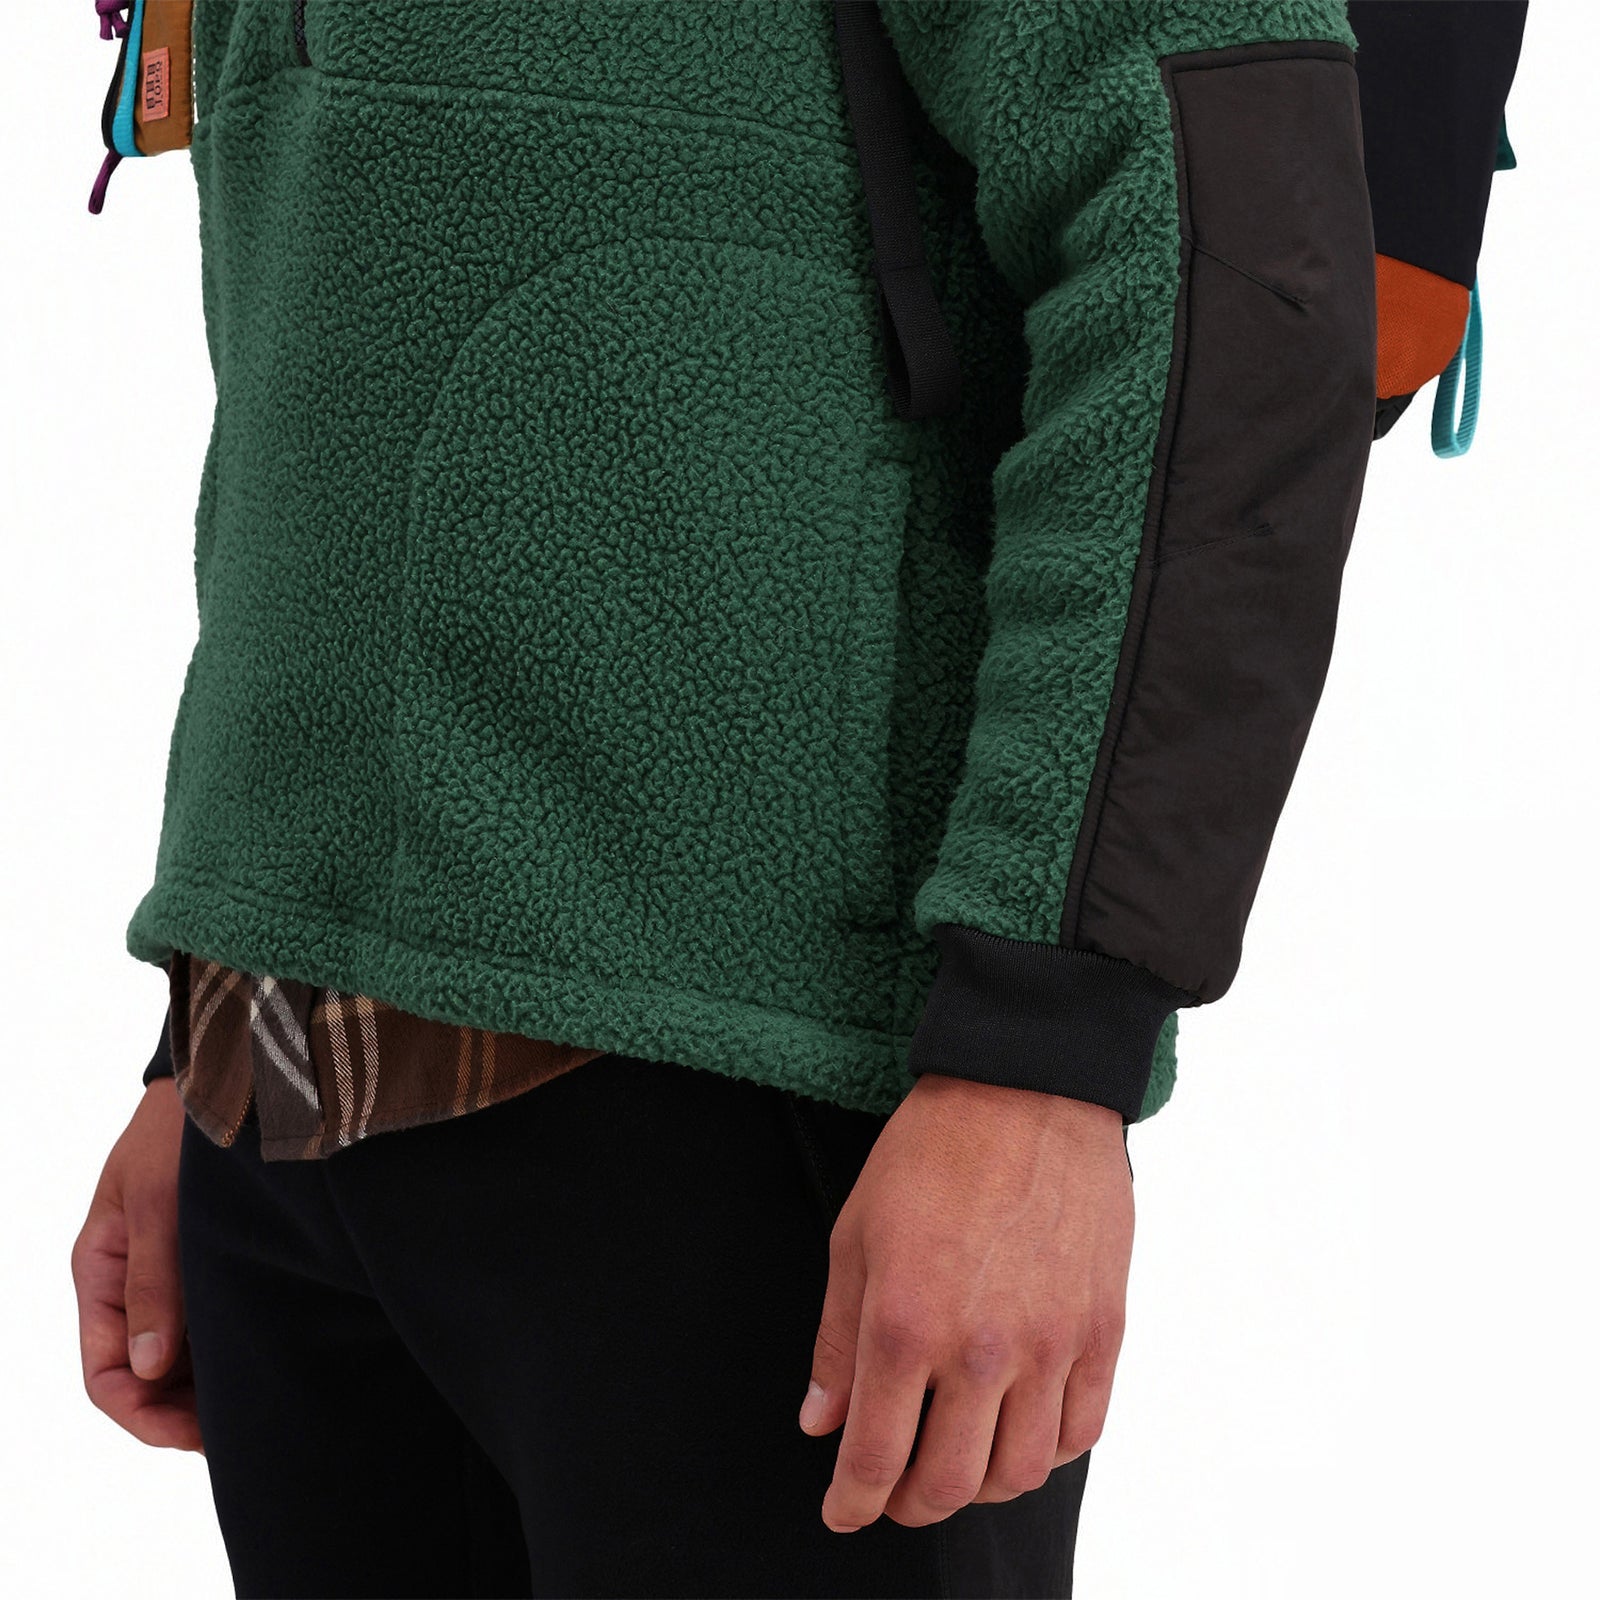 General front model detail shot of hand pockets and sleeve cuff on Topo Designs Men's Mountain Fleece Pullover in "Forest" green.